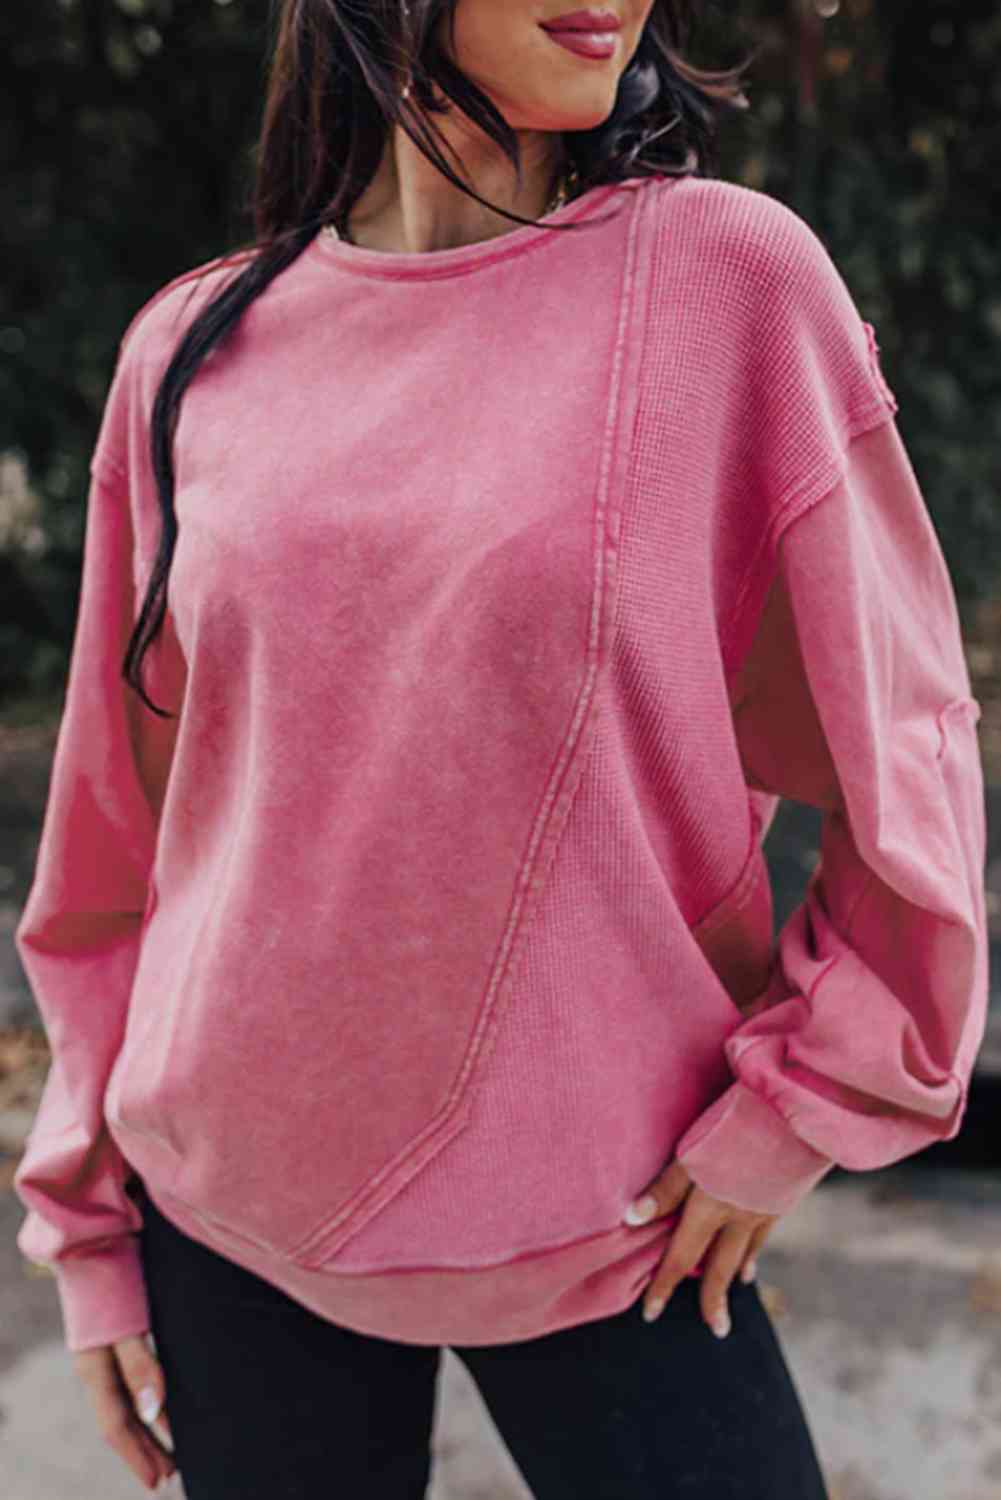 Pale Violet Red Exposed Seam Round Neck Long Sleeve Sweatshirt Sentient Beauty Fashions Apparel & Accessories